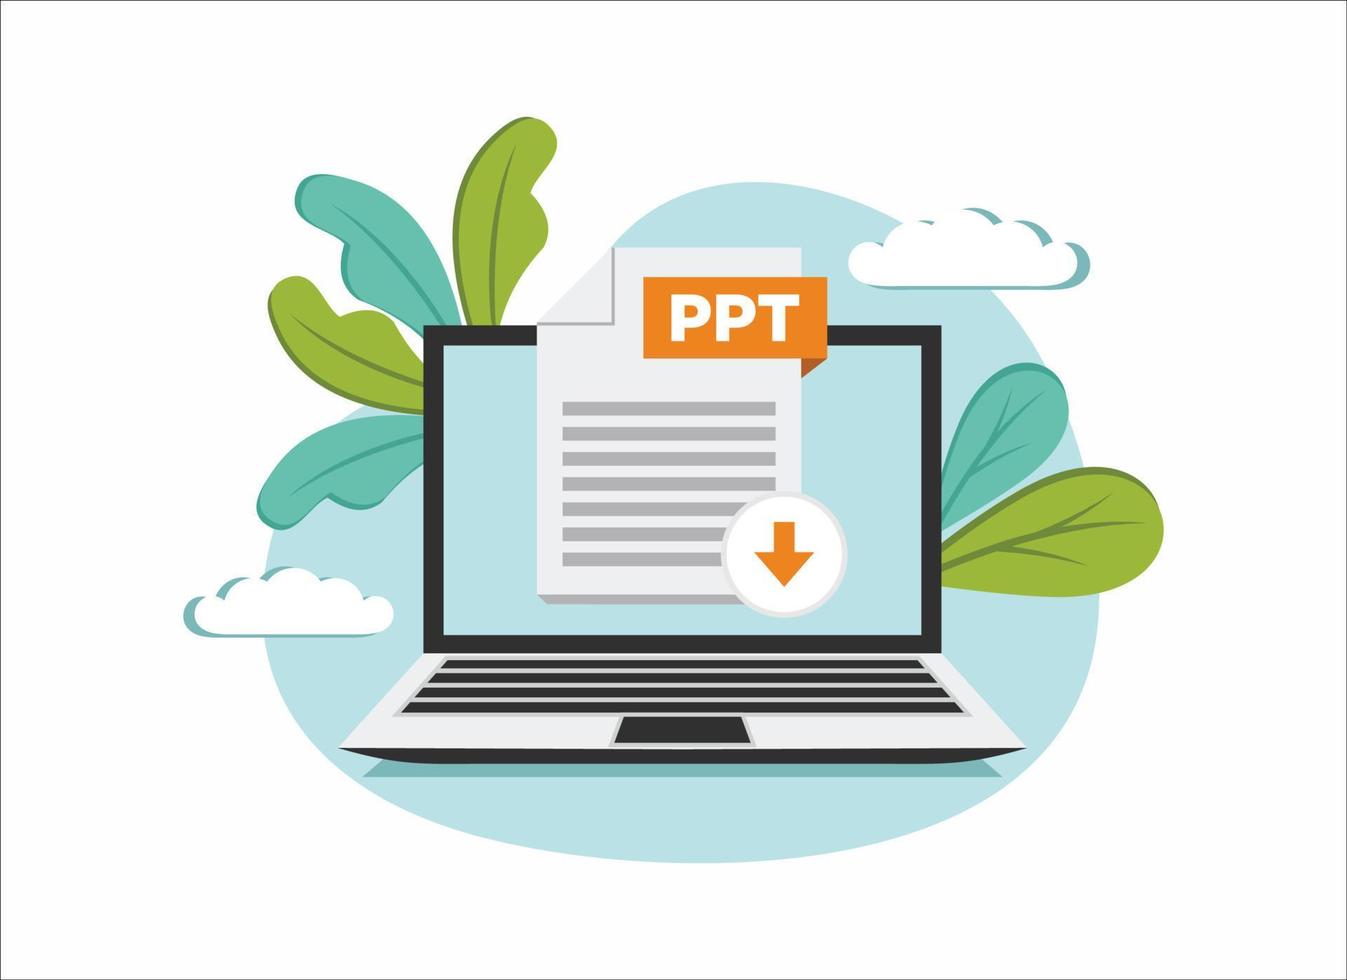 Download ppt icon file with label on laptop screen. Downloading document concept vector